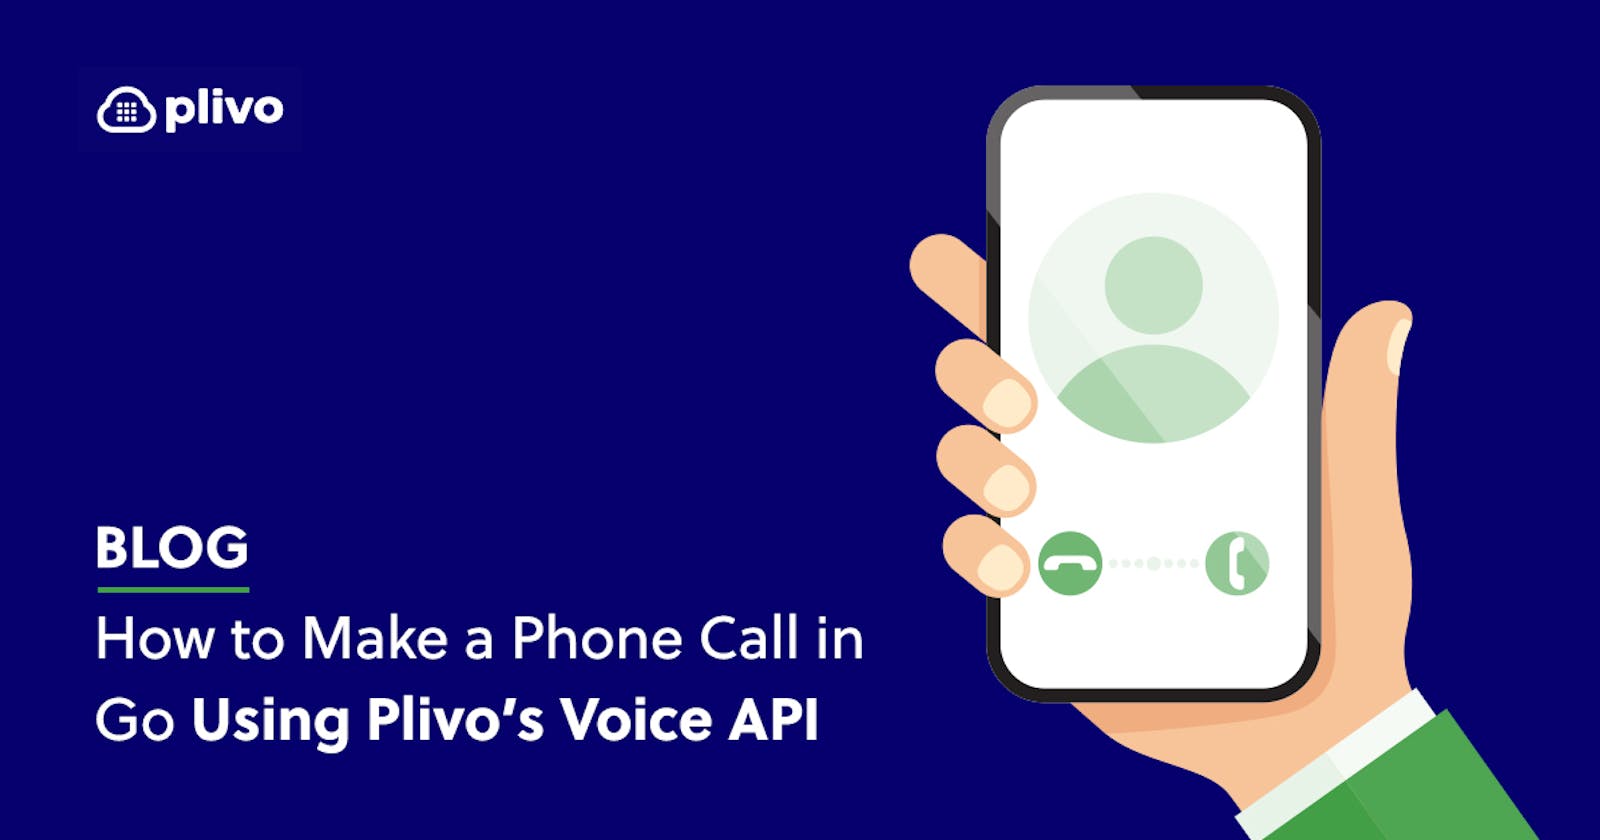 How to Make a Phone Call in Go Using Plivo’s Voice API